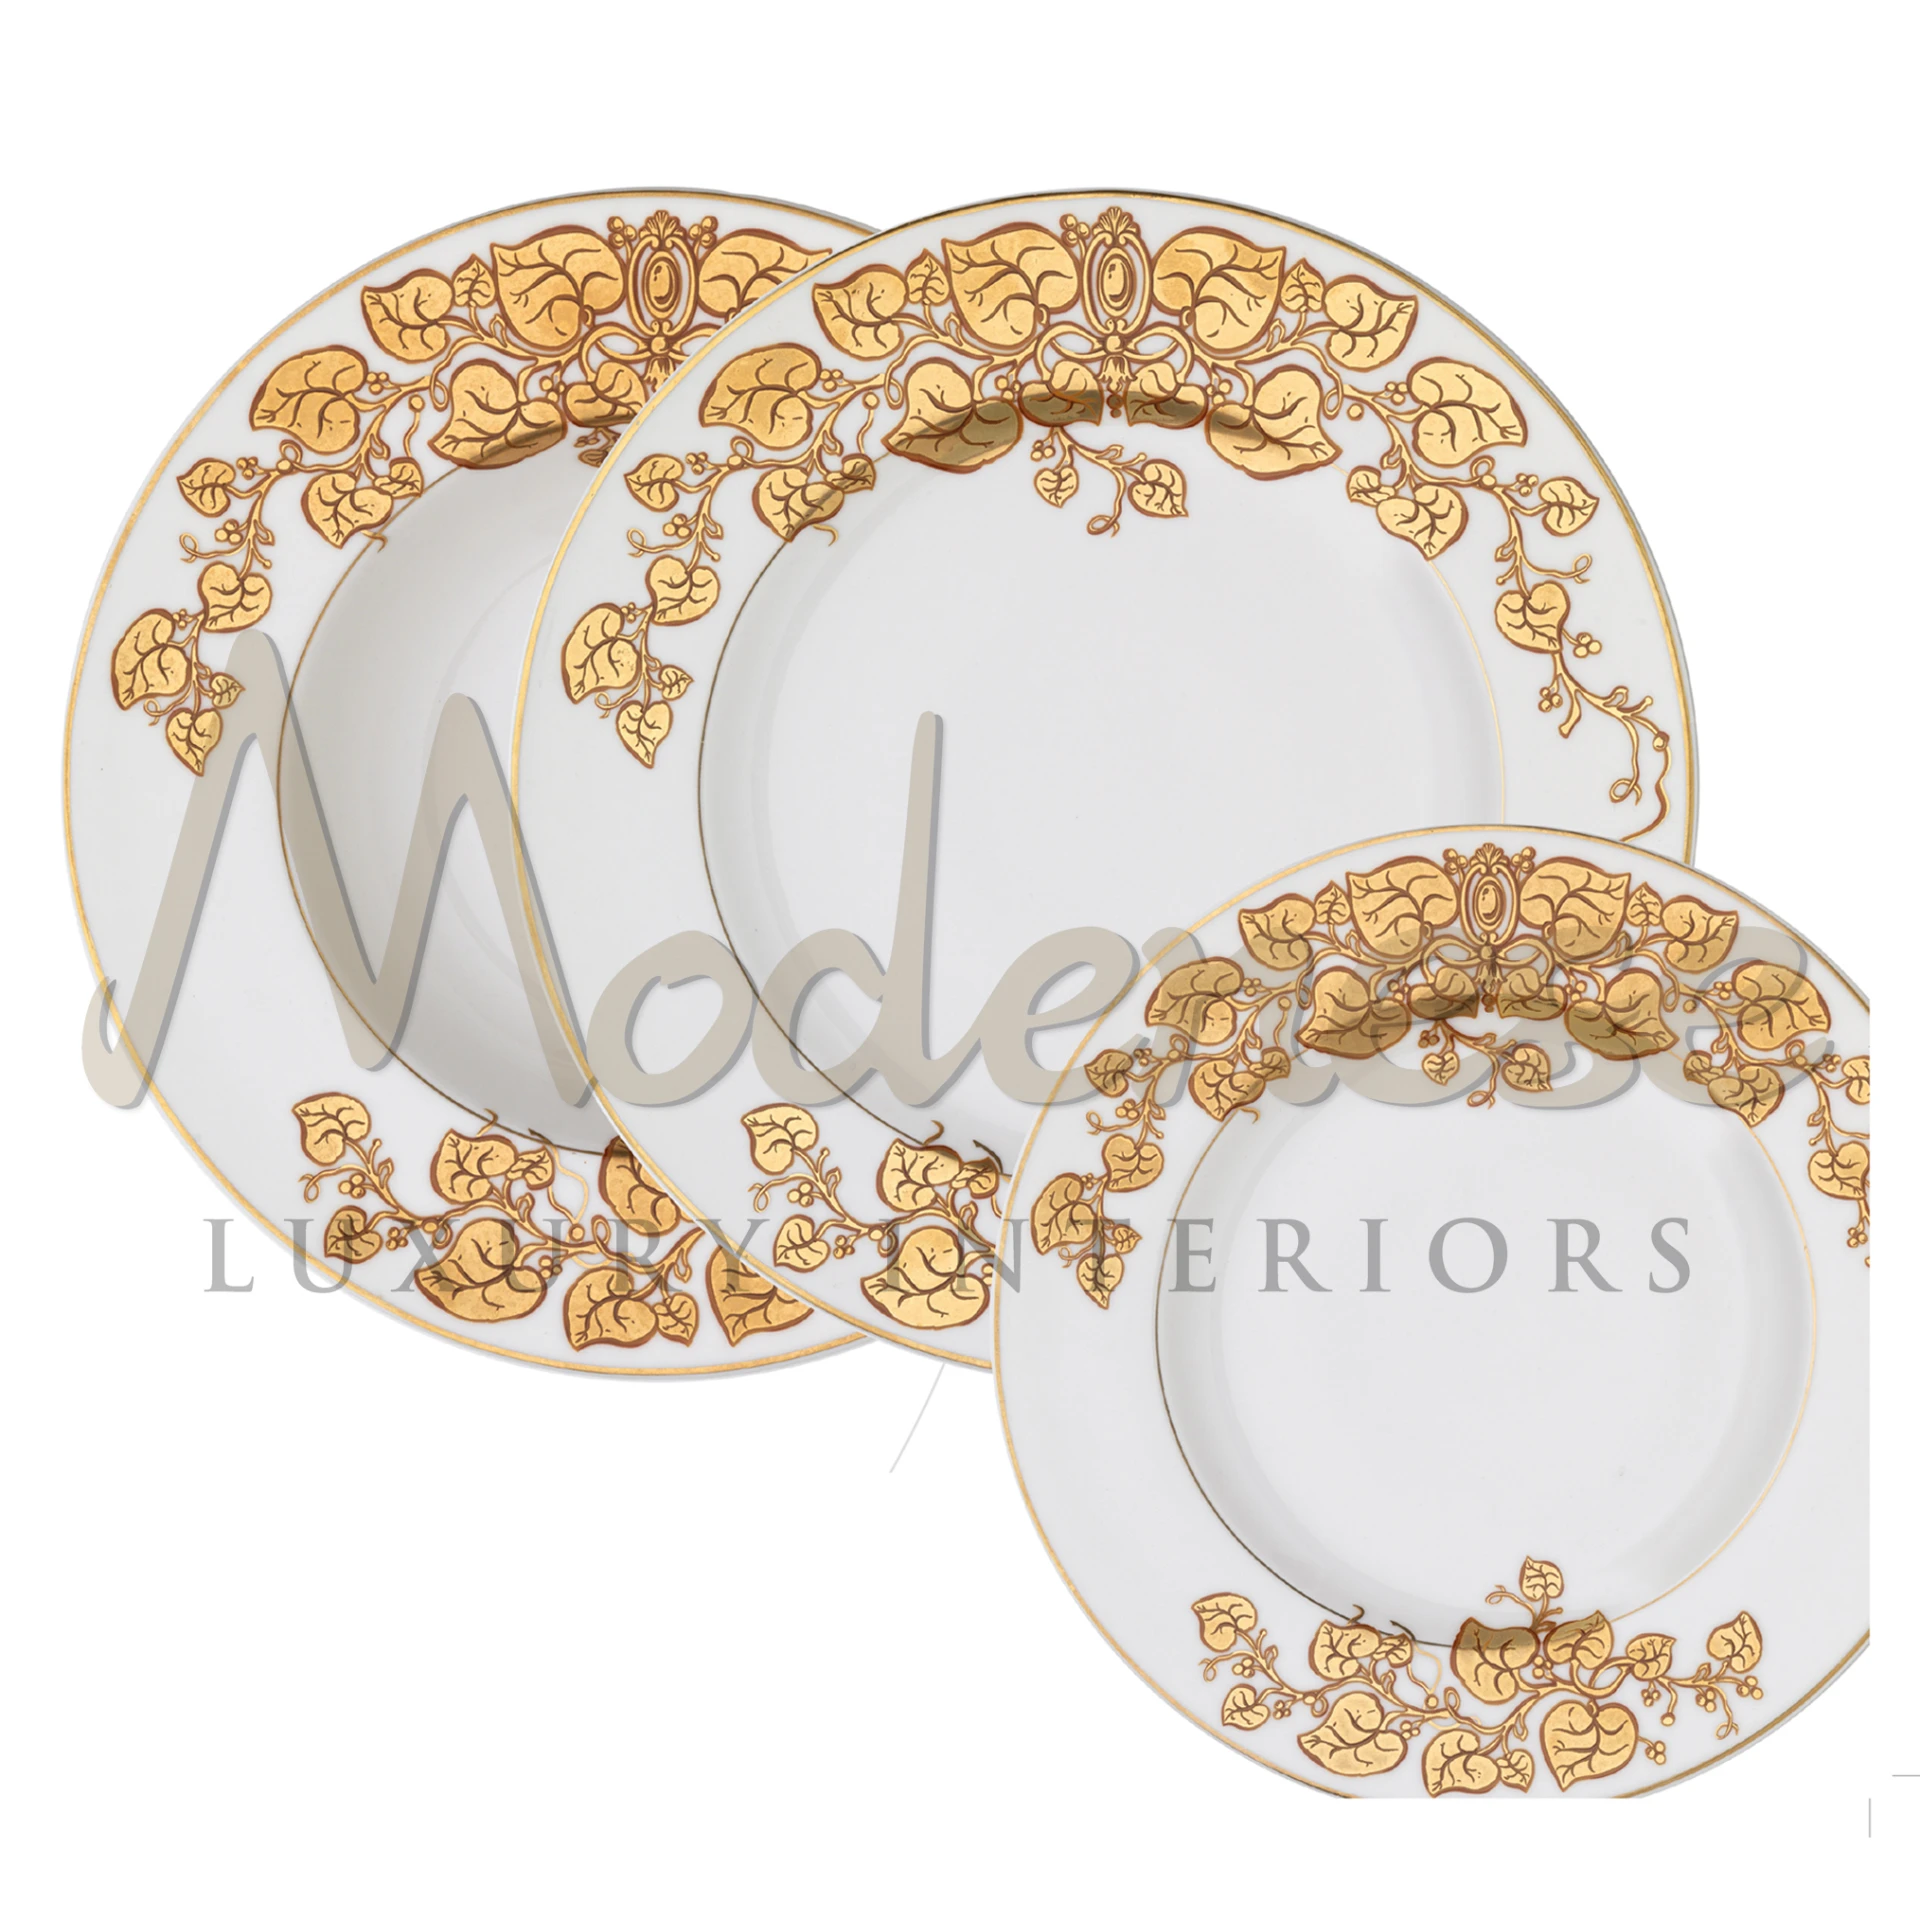 Three white porcelain plates of different sizes with golden floral designs on the corners.